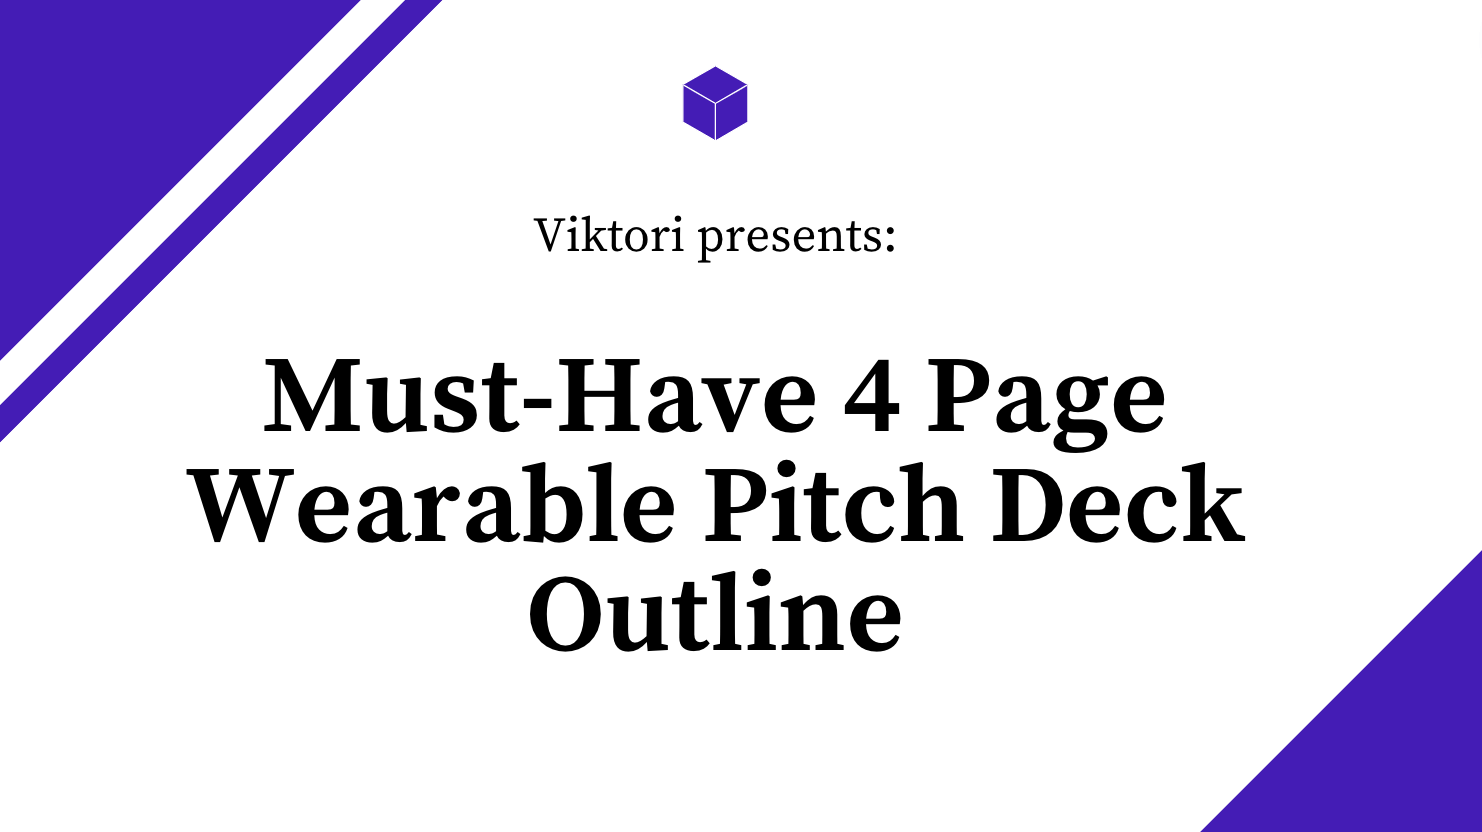 wearable pitch deck outline guide